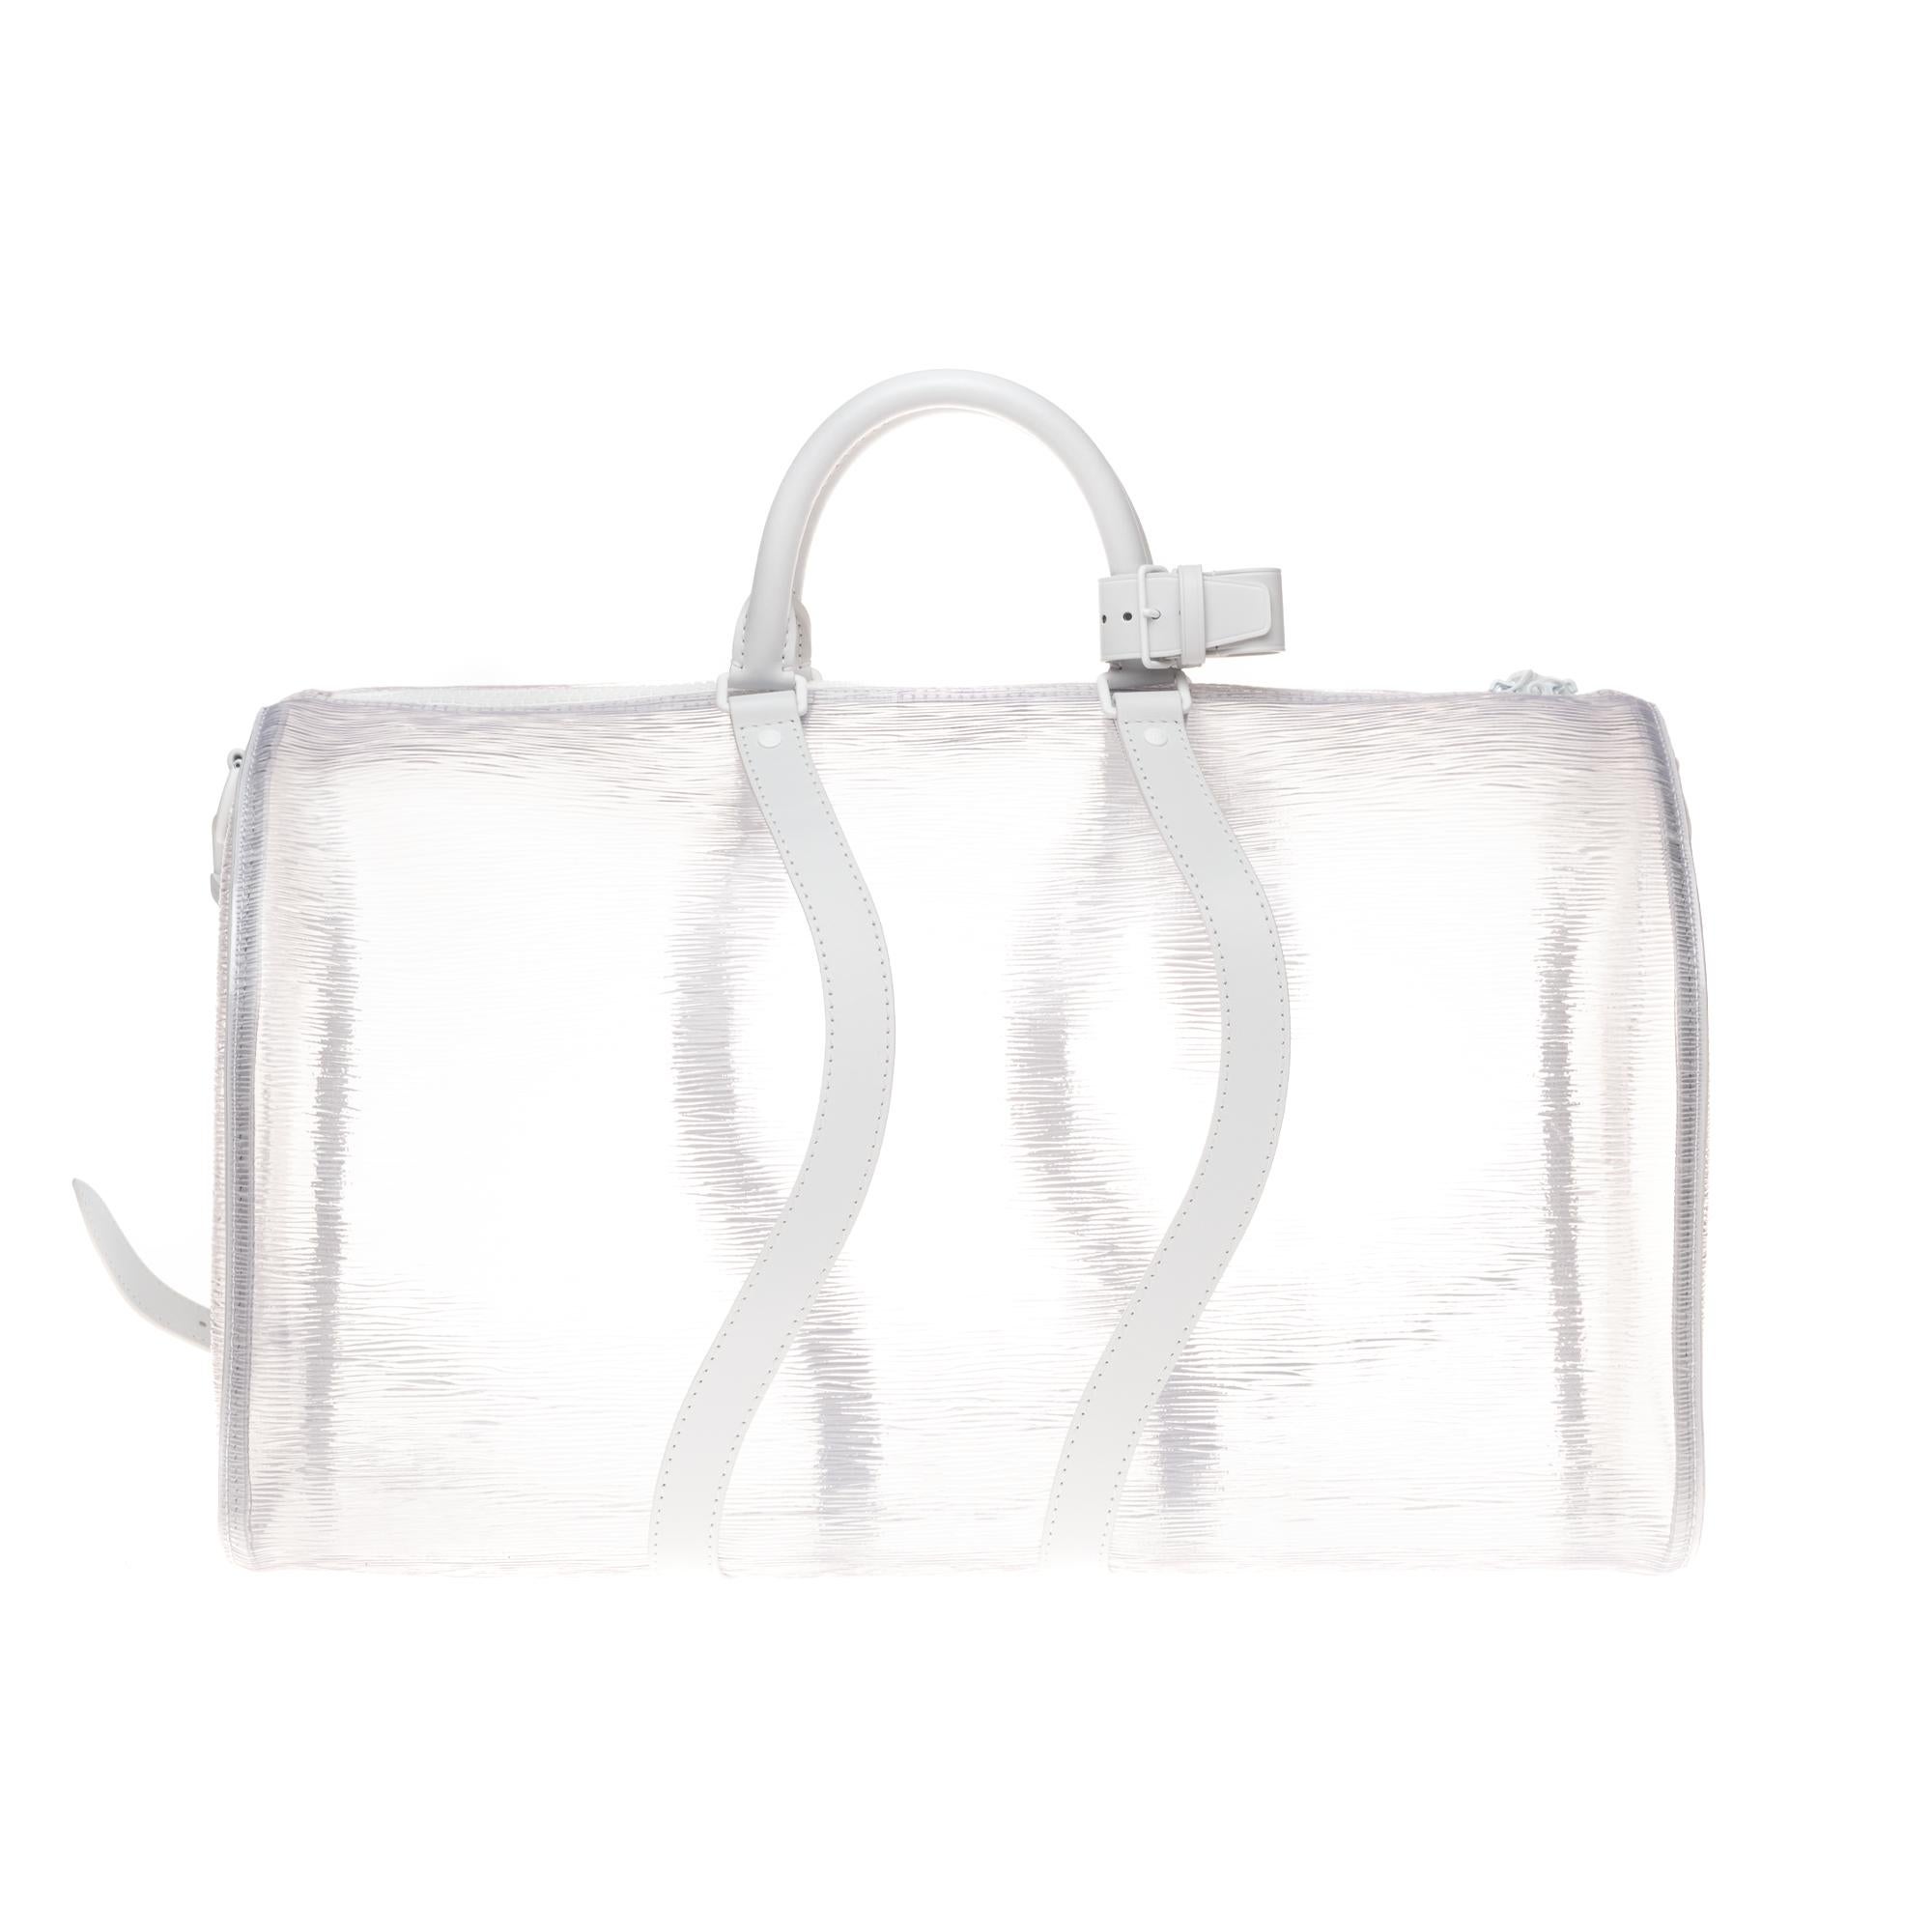 Ultra limited edition by LV:

Virgil Abloh continues to explore innovative materials for the Spring-Summer 2020 pre-collection with this Keepall Shoulder Bag 50 in transparent and durable PVC, embossed with the Epi motif. 
To reinvent this iconic